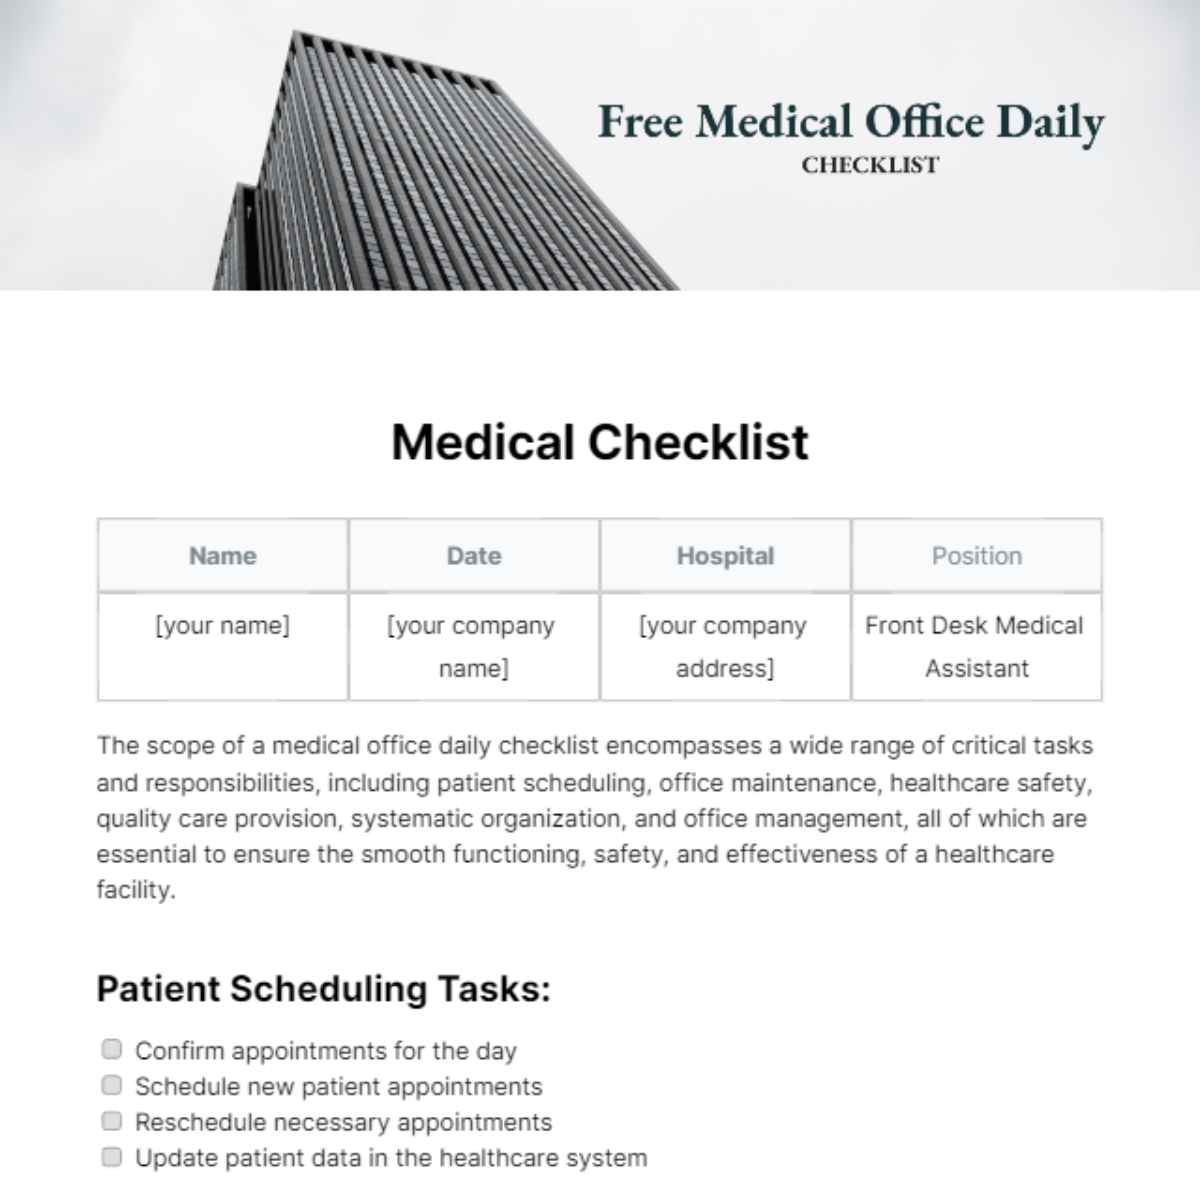 Free Medical Office Daily Checklist Template